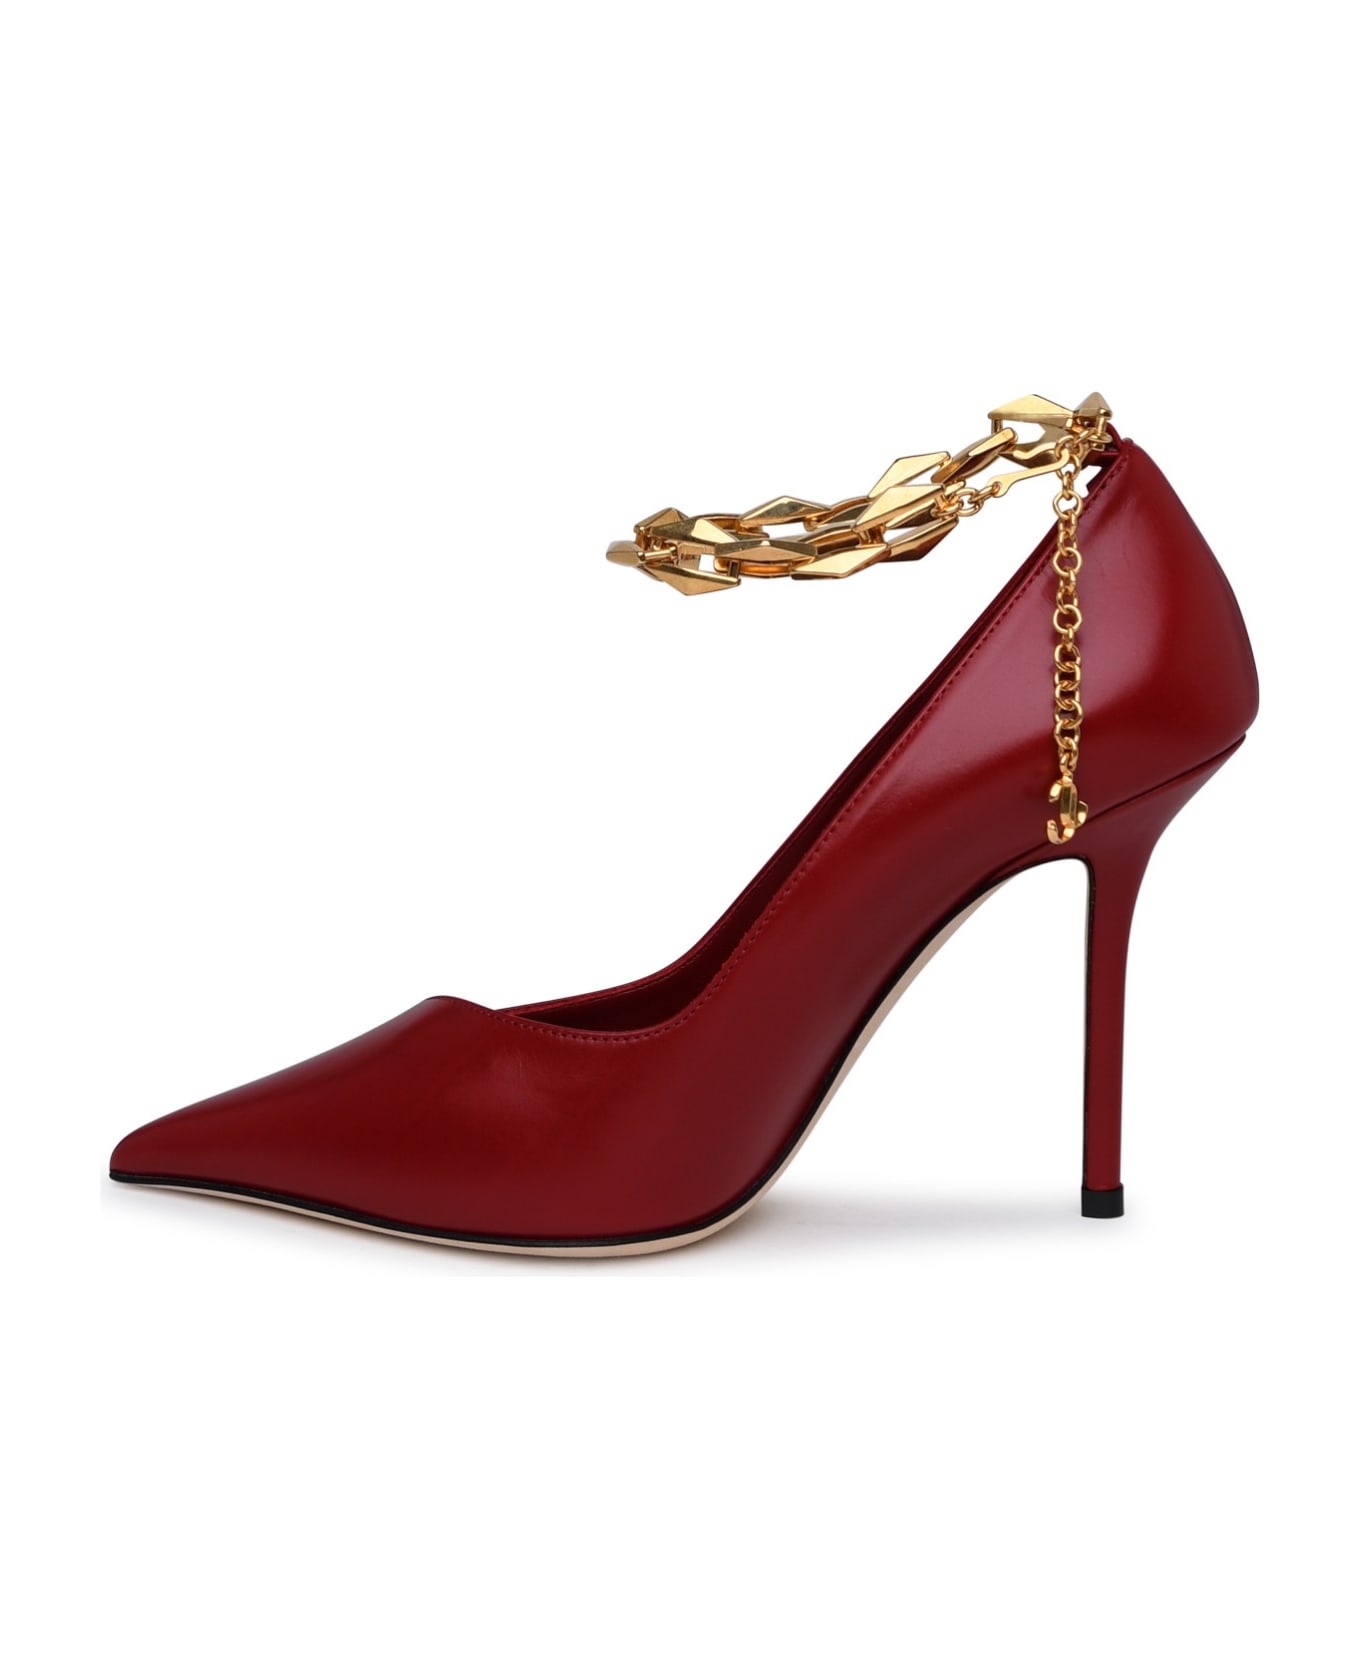 Jimmy Choo Diamond Pumps In Red Leather - Red